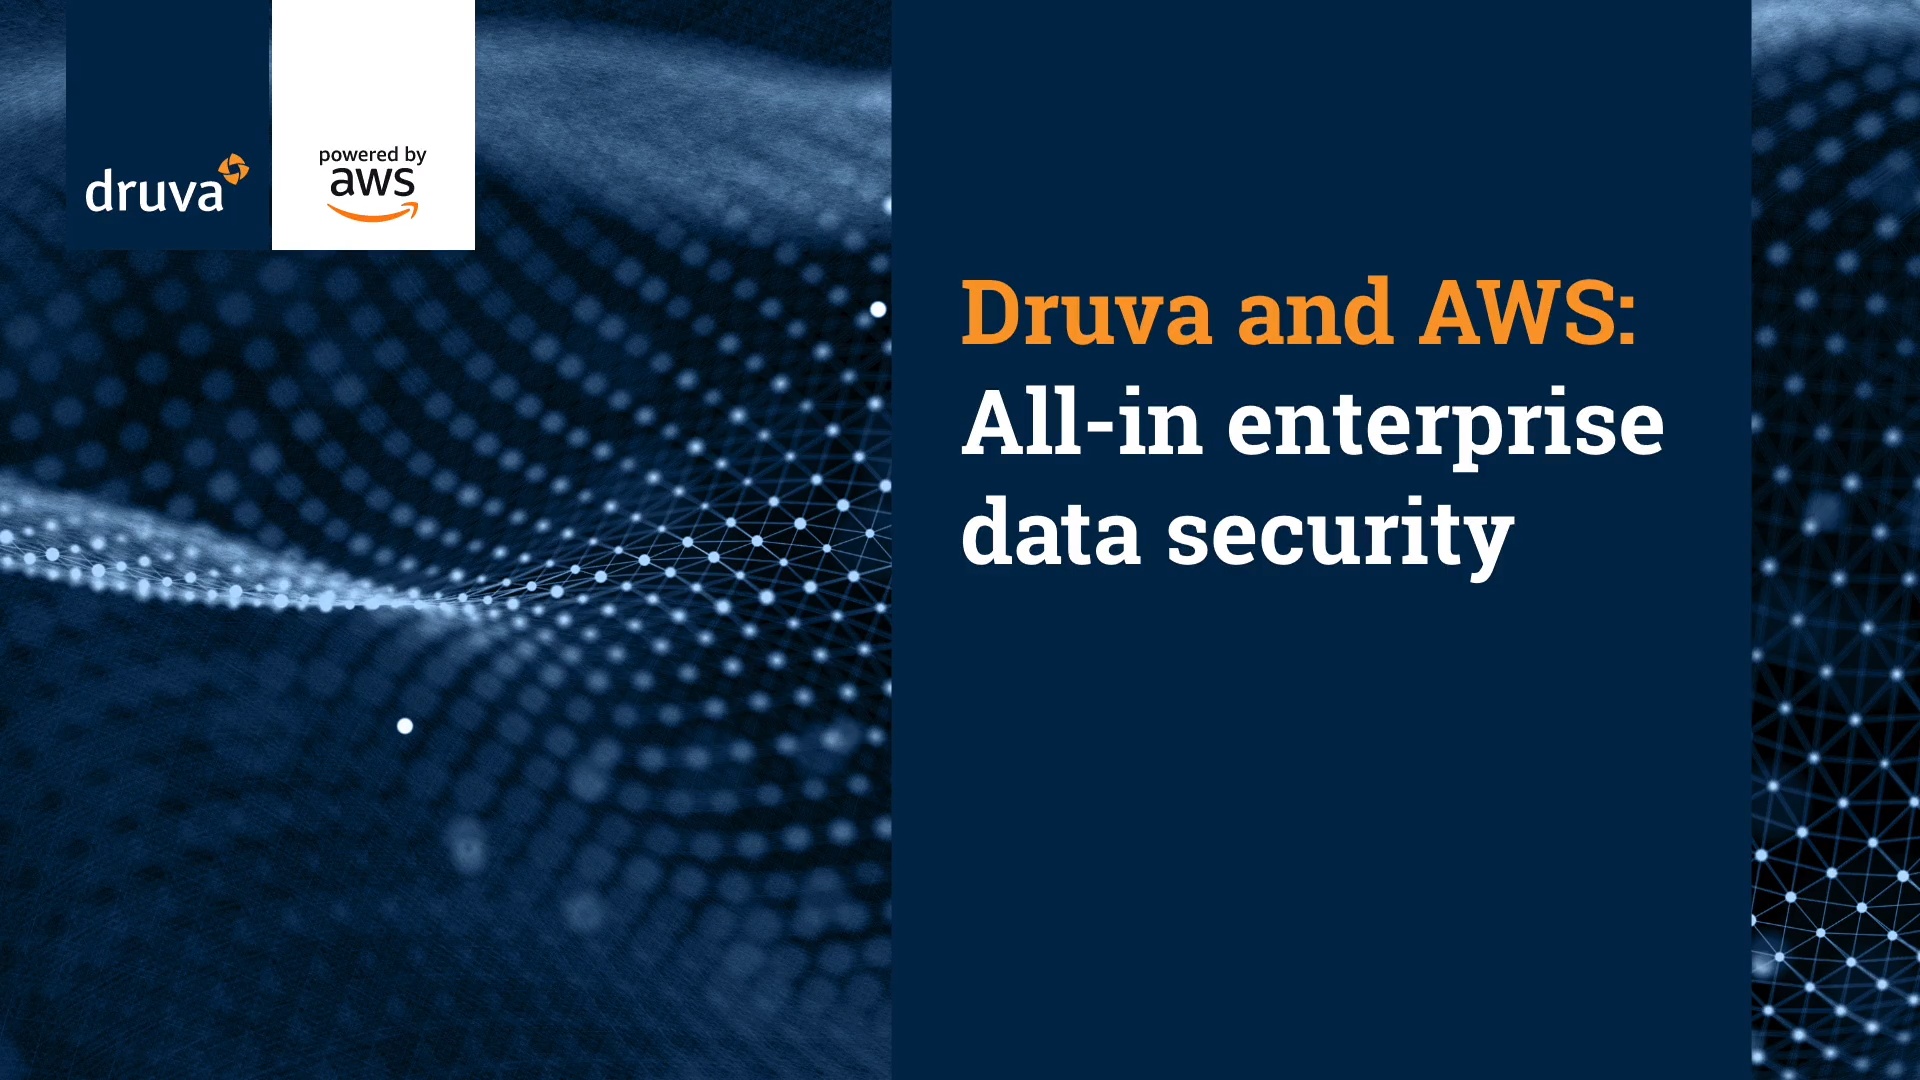 Druva and AWS: All-in enterprise data security